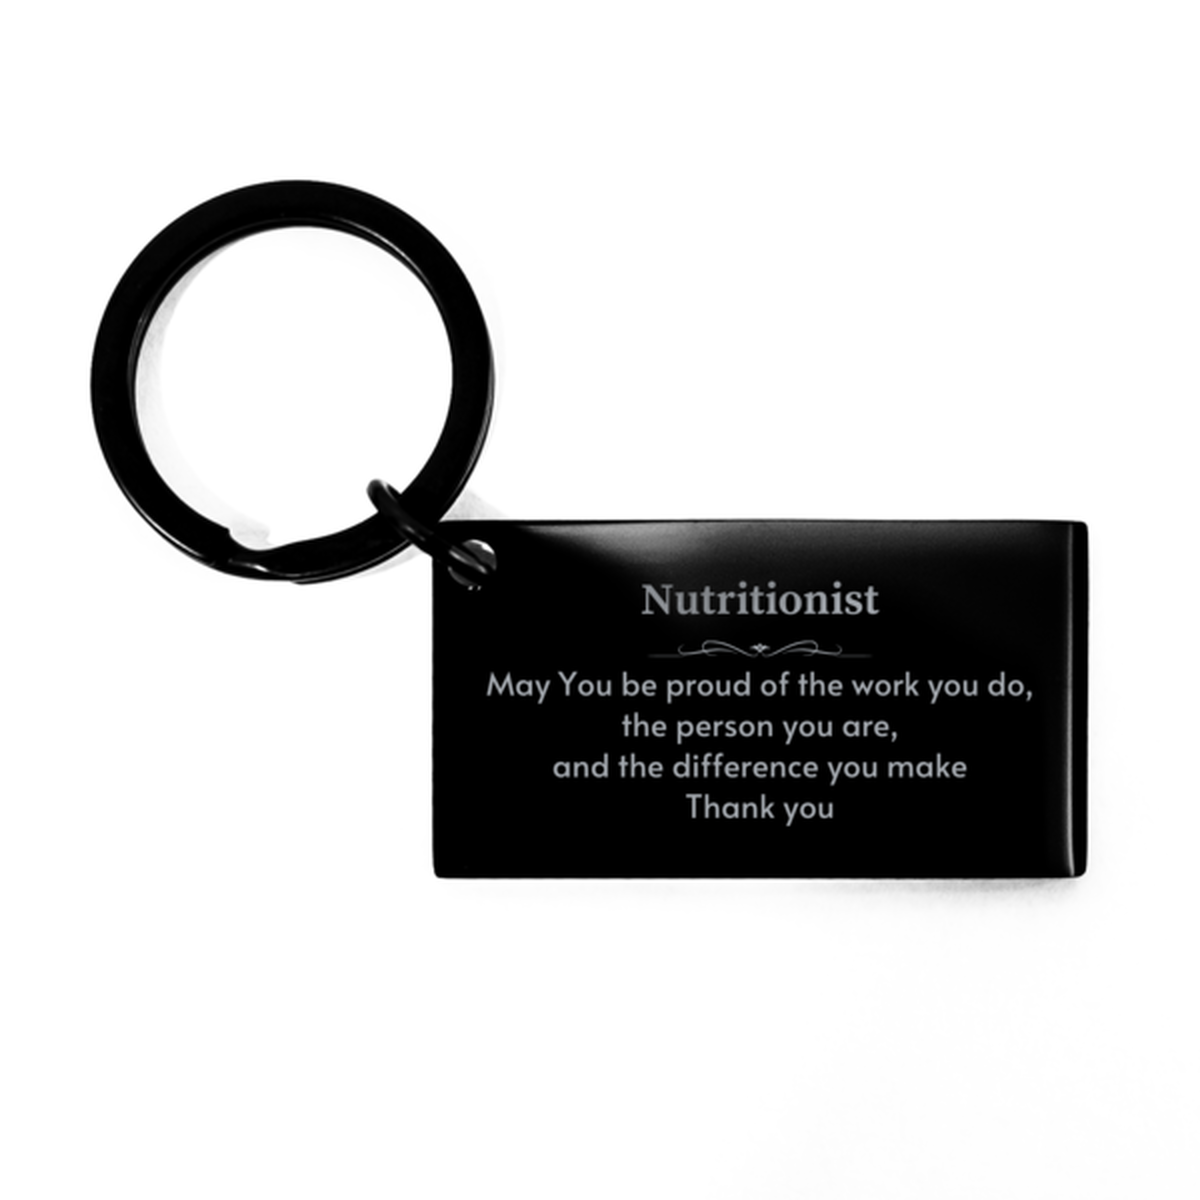 Heartwarming Keychain Retirement Coworkers Gifts for Nutritionist, Pharmacist May You be proud of the work you do, the person you are Gifts for Boss Men Women Friends